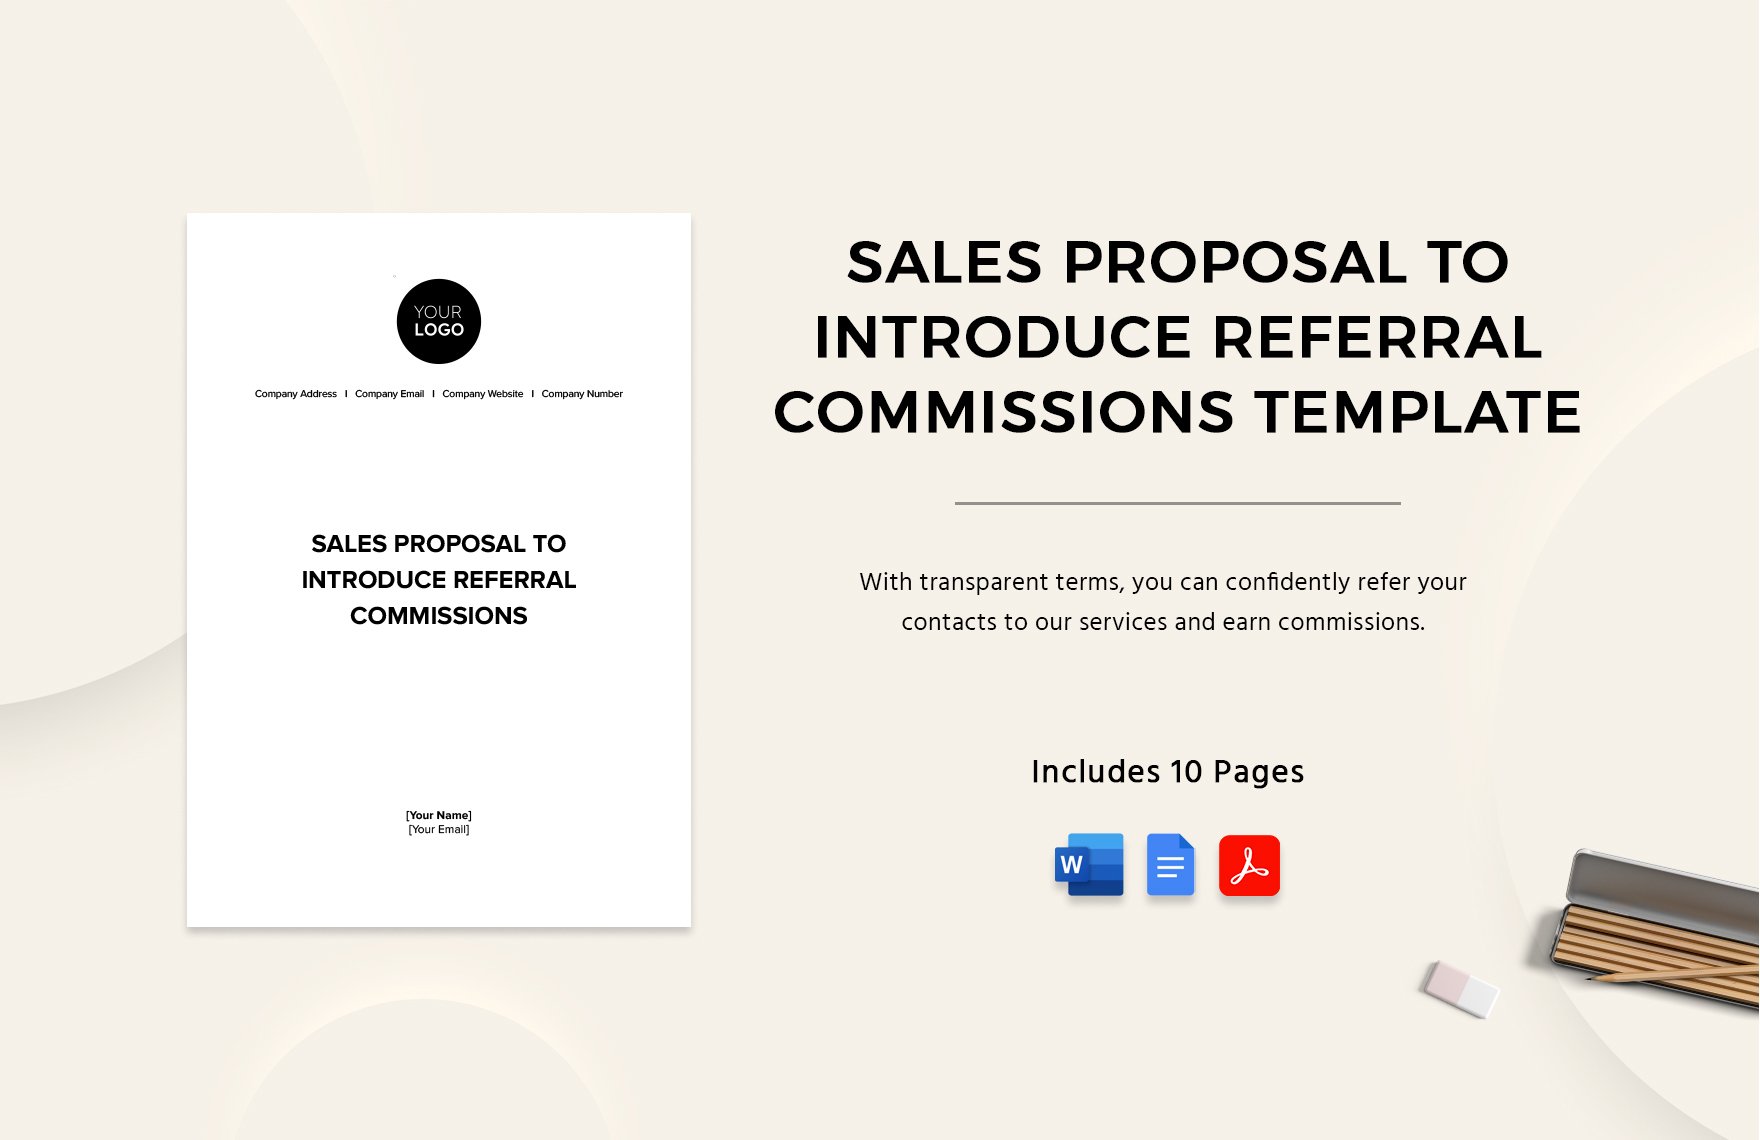 Sales Proposal to Introduce Referral Commissions Template